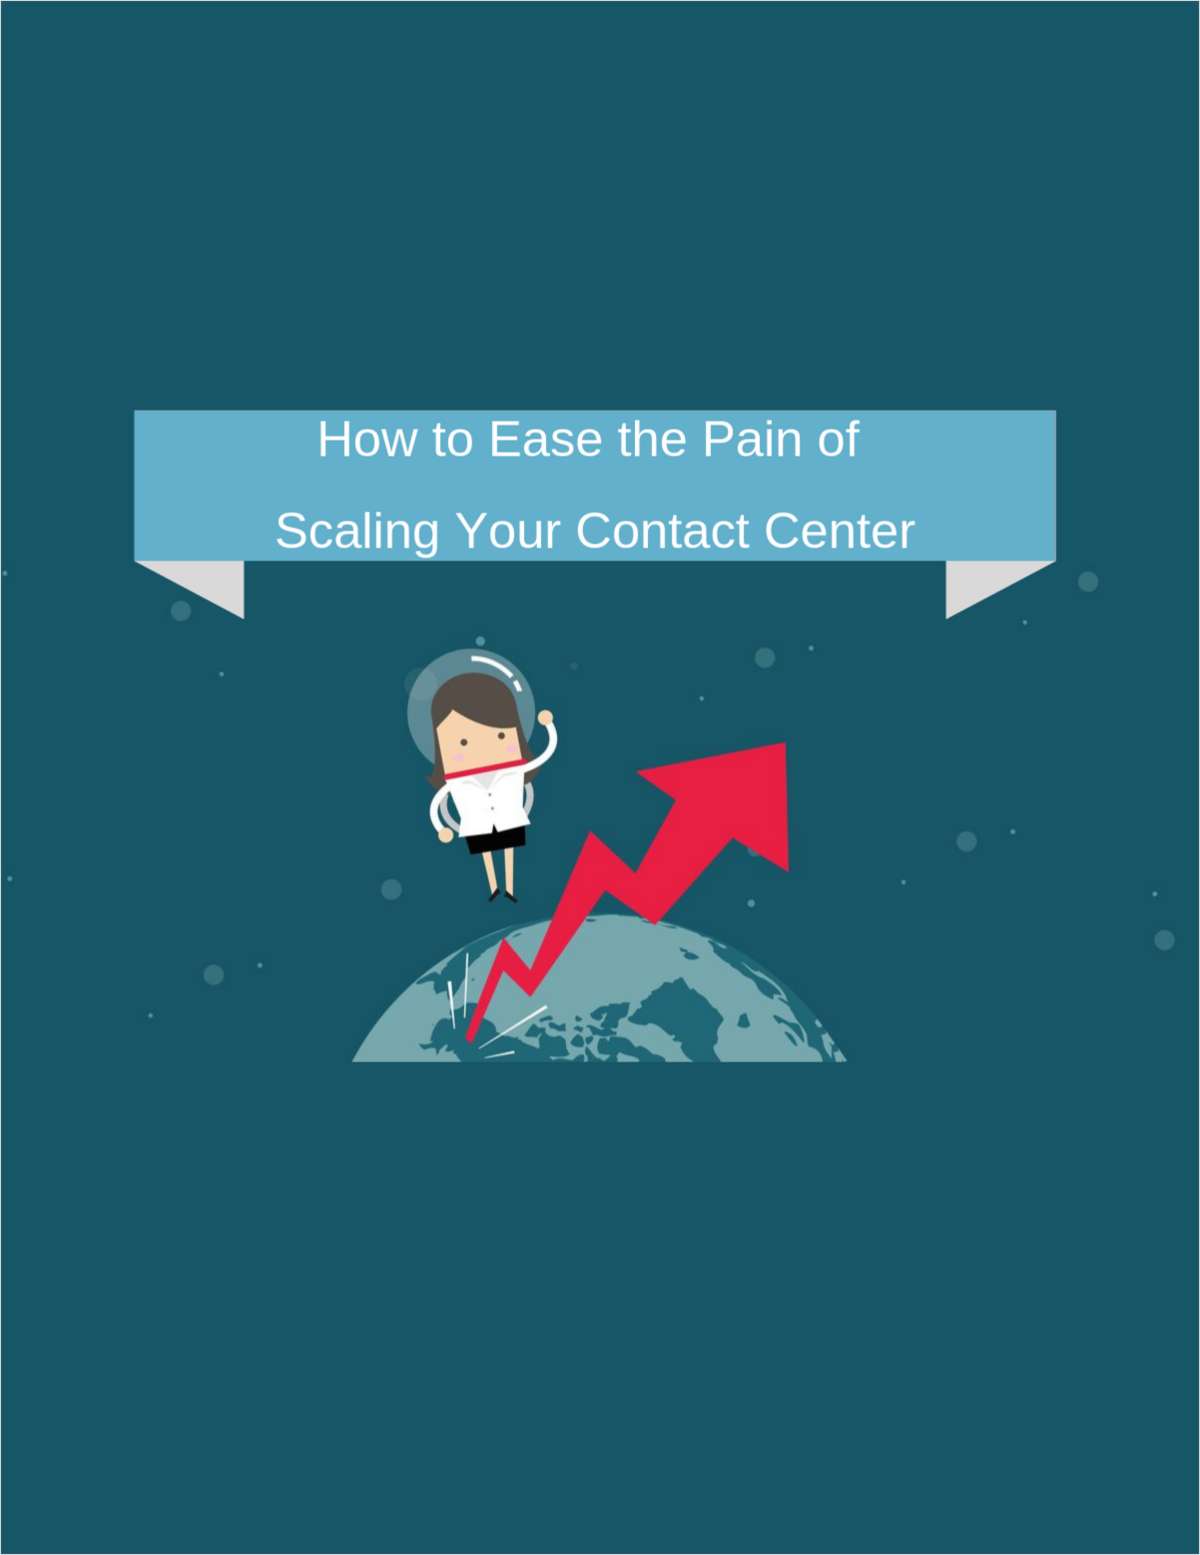 How to Ease the Pain of Scaling Your Contact Center